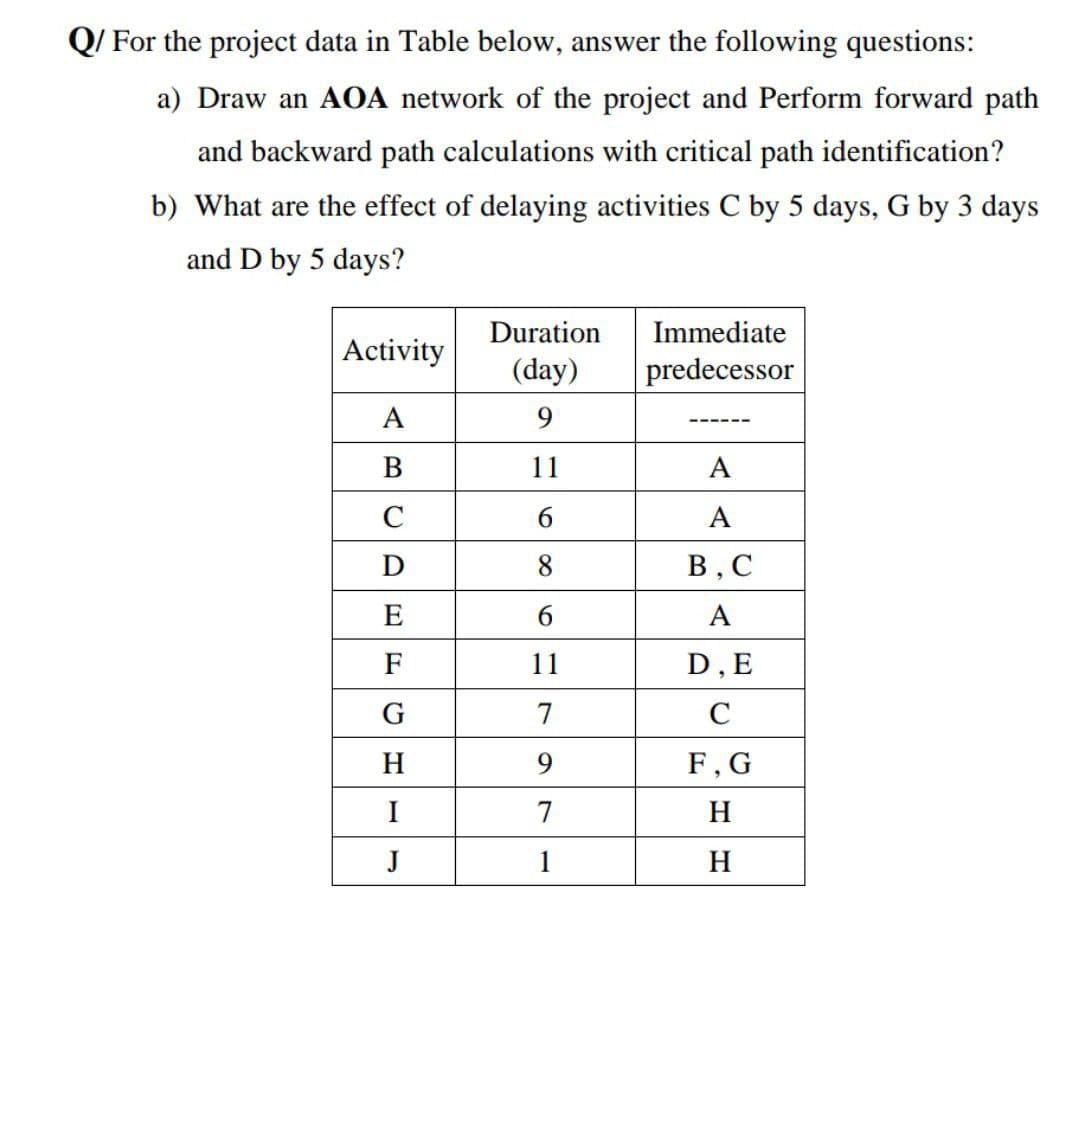 Q/ For the project data in Table below, answer the following questions:
a) Draw an AOA network of the project and Perform forward path
and backward path calculations with critical path identification?
b) What are the effect of delaying activities C by 5 days, G by 3 days
and D by 5 days?
Duration
Immediate
Activity
(day)
predecessor
A
9
-----
В
11
A
C
А
D
В, С
E
A
F
11
D,E
G
7
C
H
9
F, G
I
7
H
J
1
H
